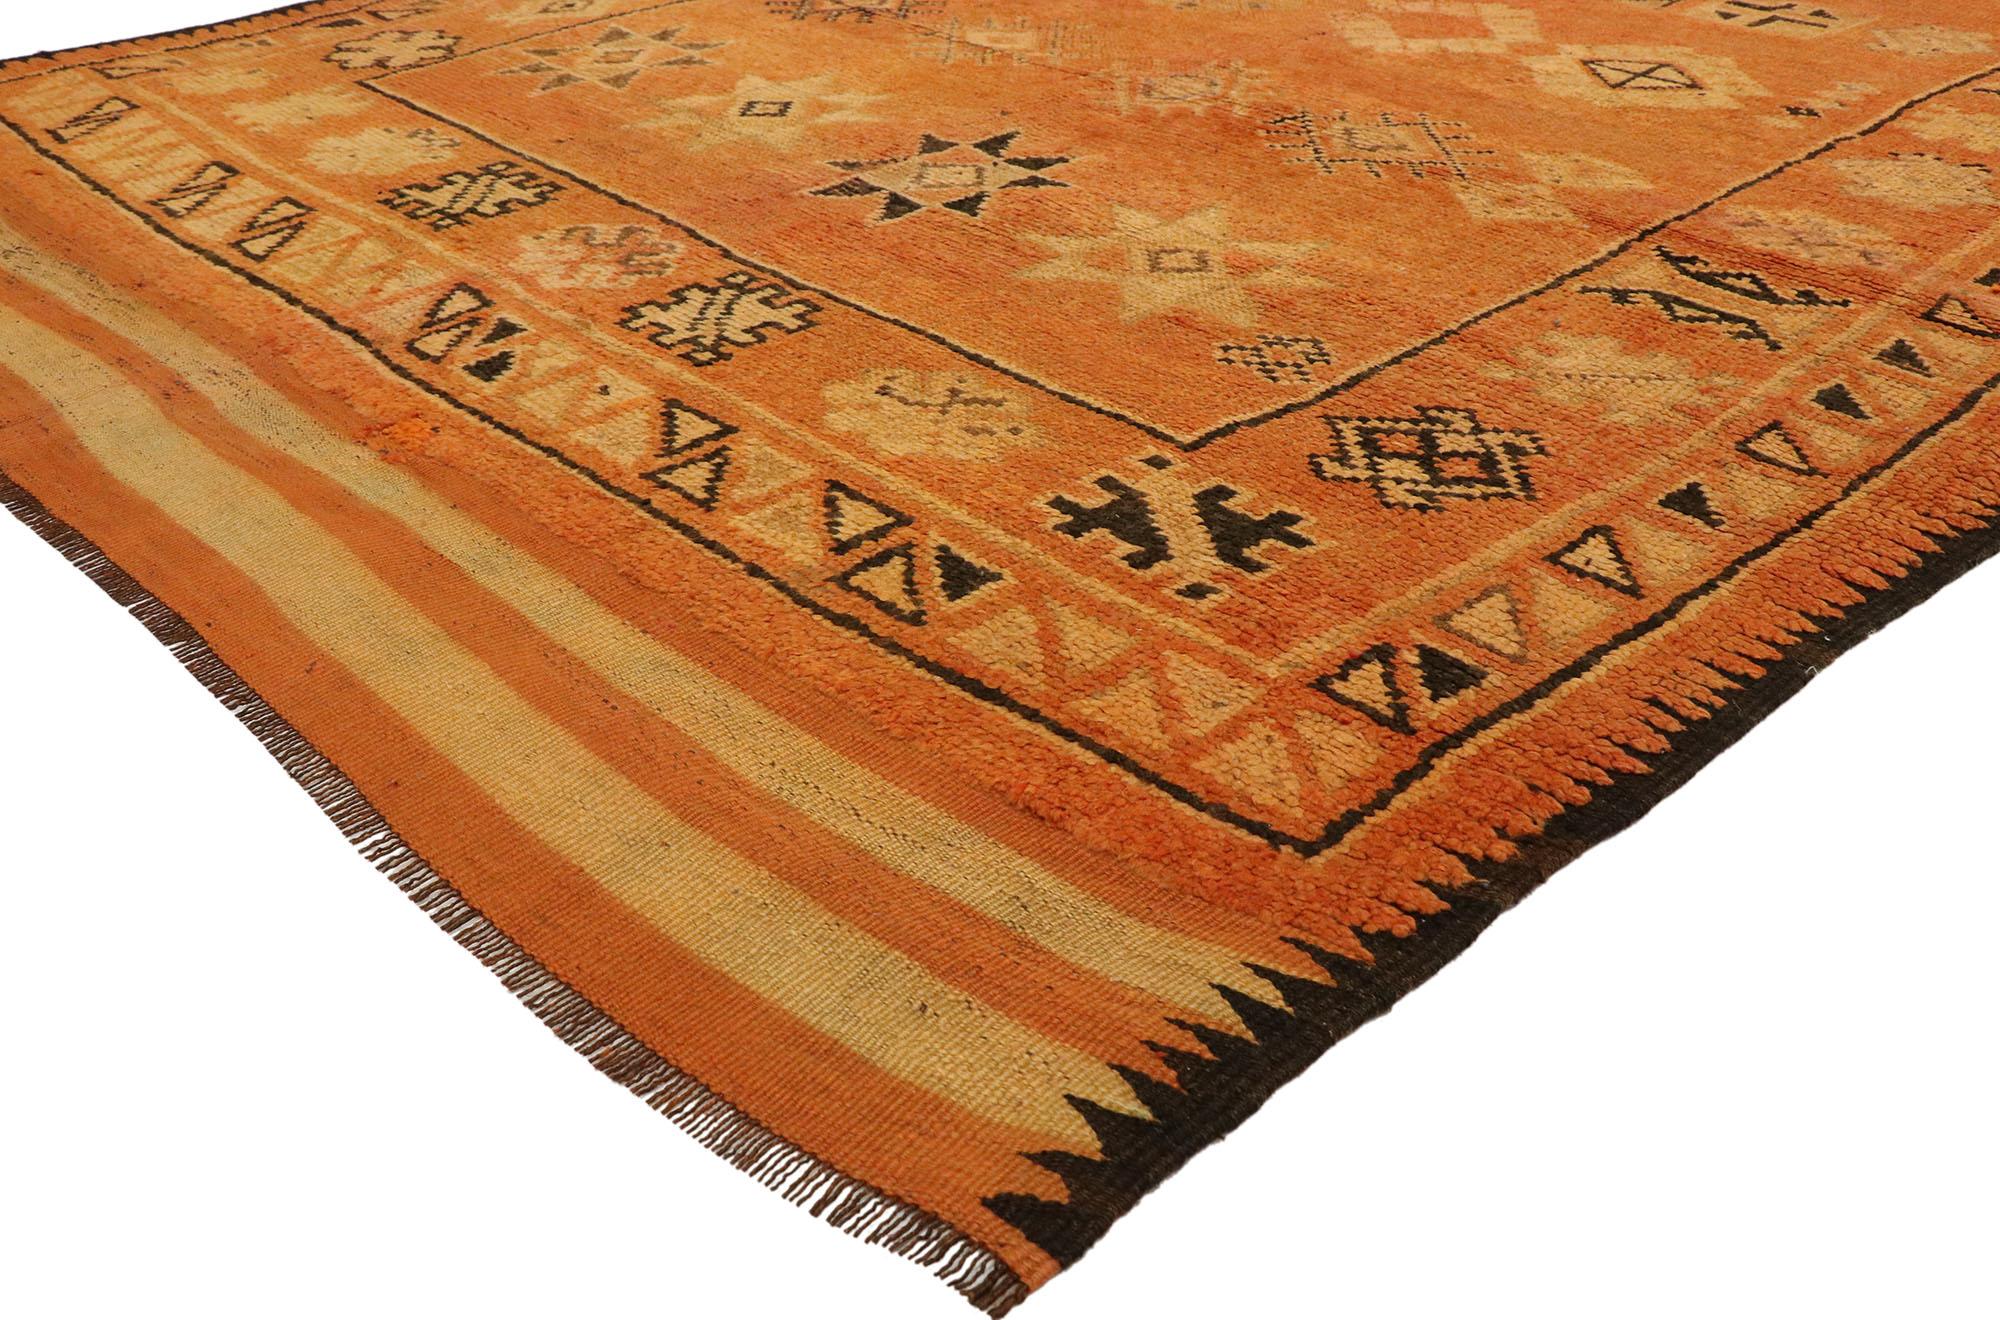 20230, vintage Berber Moroccan rug runner with tribal style. With its bold hues and beguiling beauty, this hand knotted wool vintage Berber Moroccan rug features an all-over geometric pattern composed of ambiguous tribal motifs. Eight-pointed stars